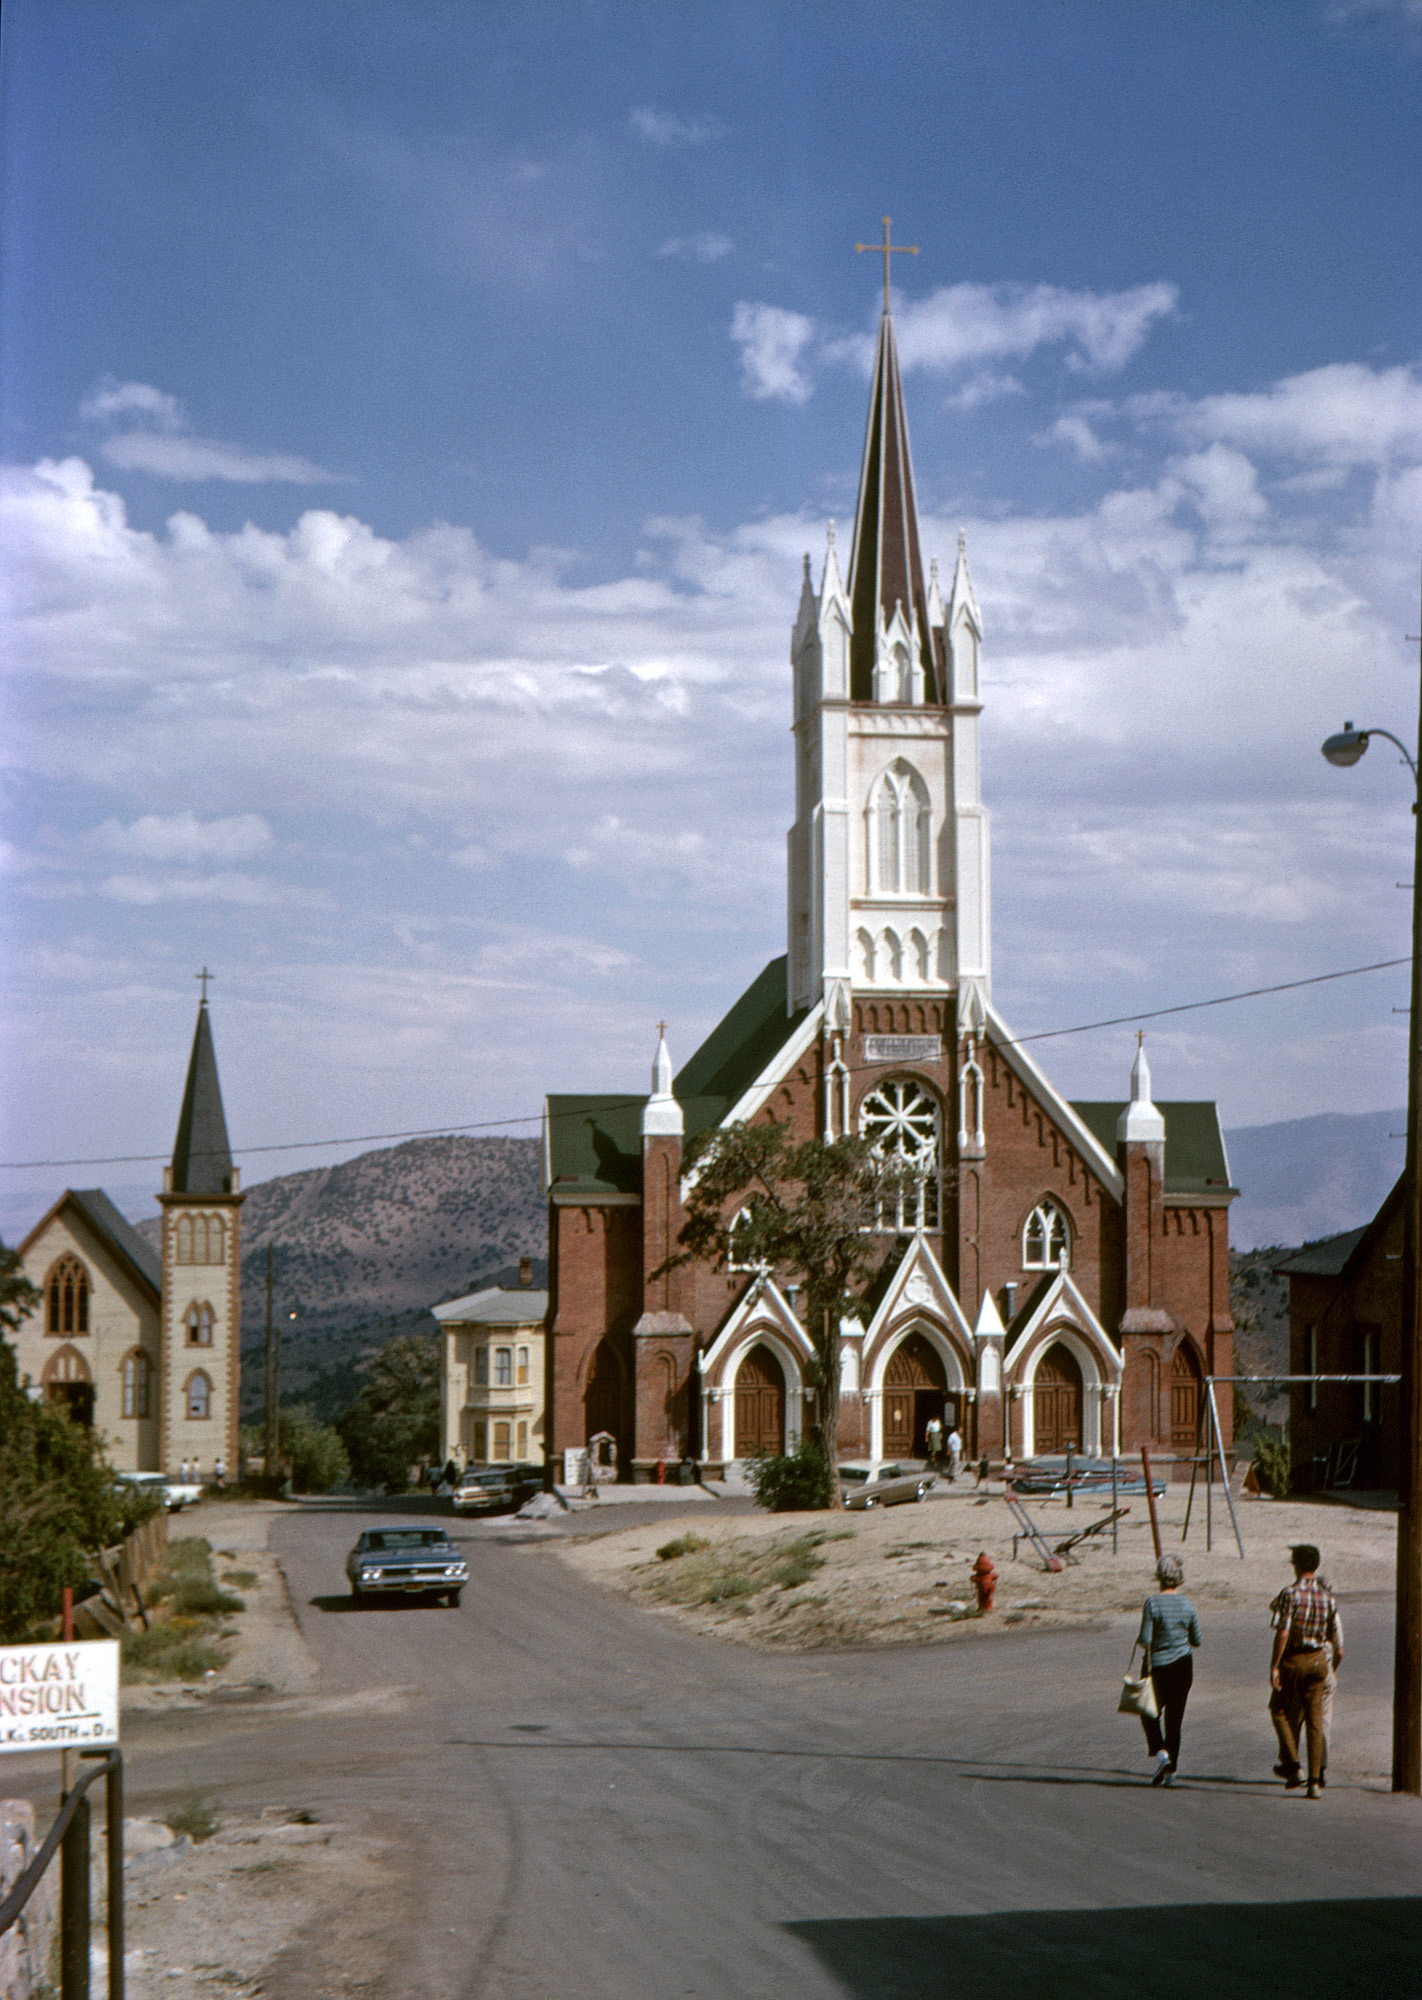 Unknowingly channeling Arthur Rothstein in Virginia City once more, I was a bit closer than he'd been to St. Mary in the Mountains Church when I took this Kodachrome slide in August 1966, and also got my mother, brother and, mostly hidden by him, my father, heading that way. I don't remember us going into the church, but another photo shows we'd parked a couple blocks down in that direction. View full size.